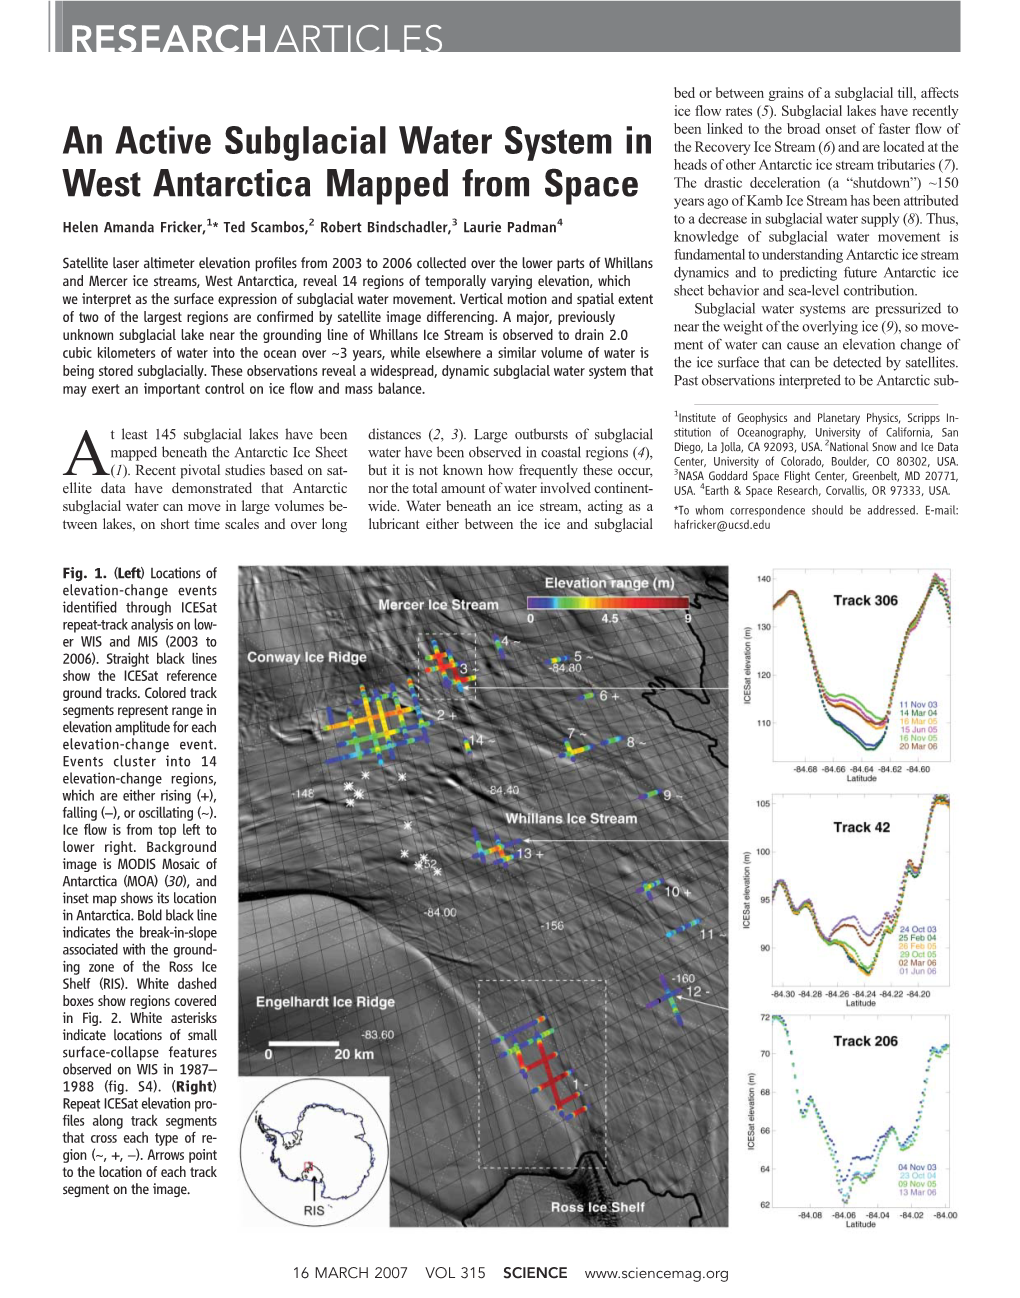 An Active Subglacial Water System in Western Antarctica Mapped From